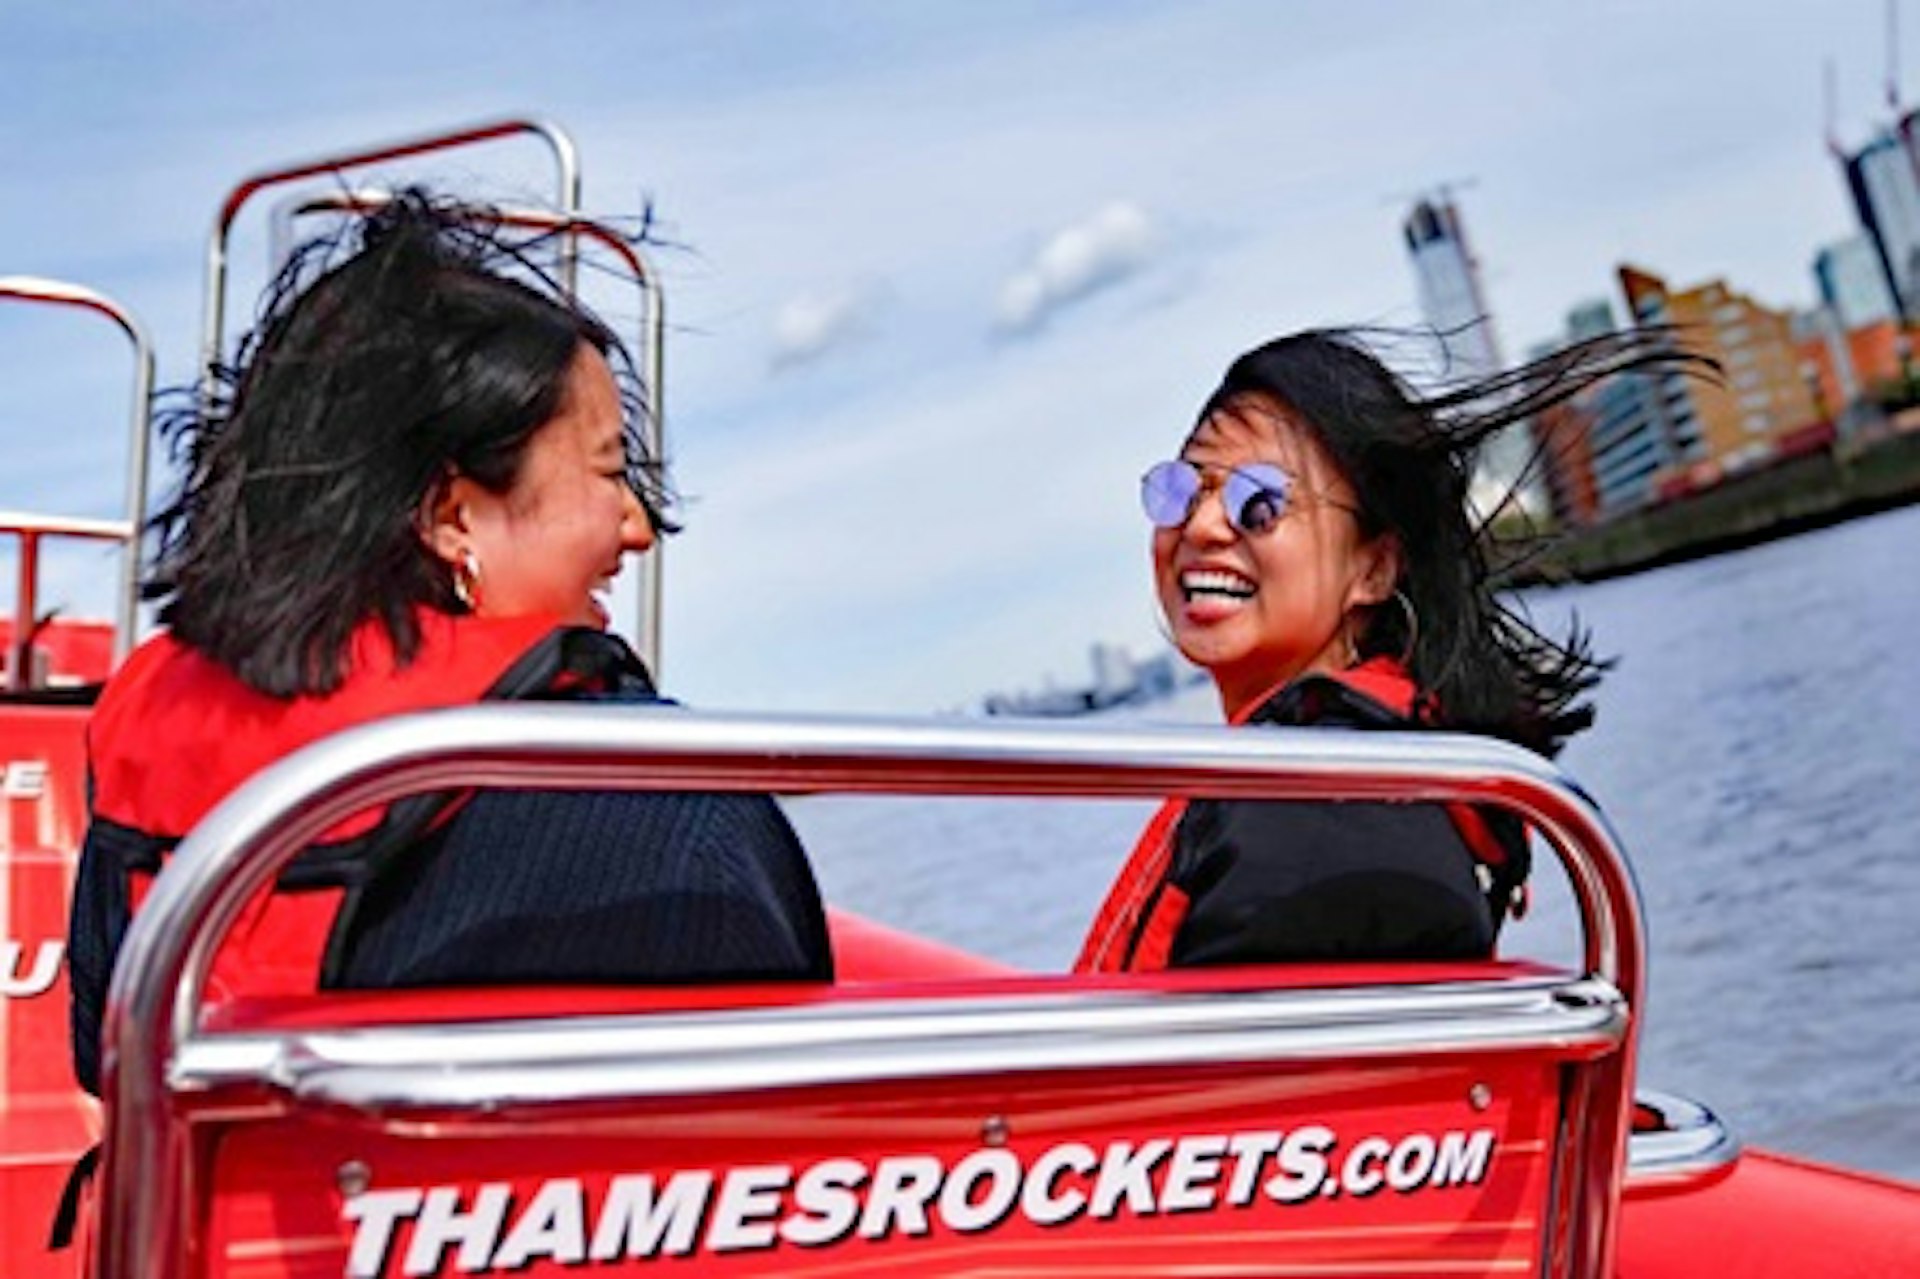 Thames Barrier Rocket Speed Boat Ride for One 3